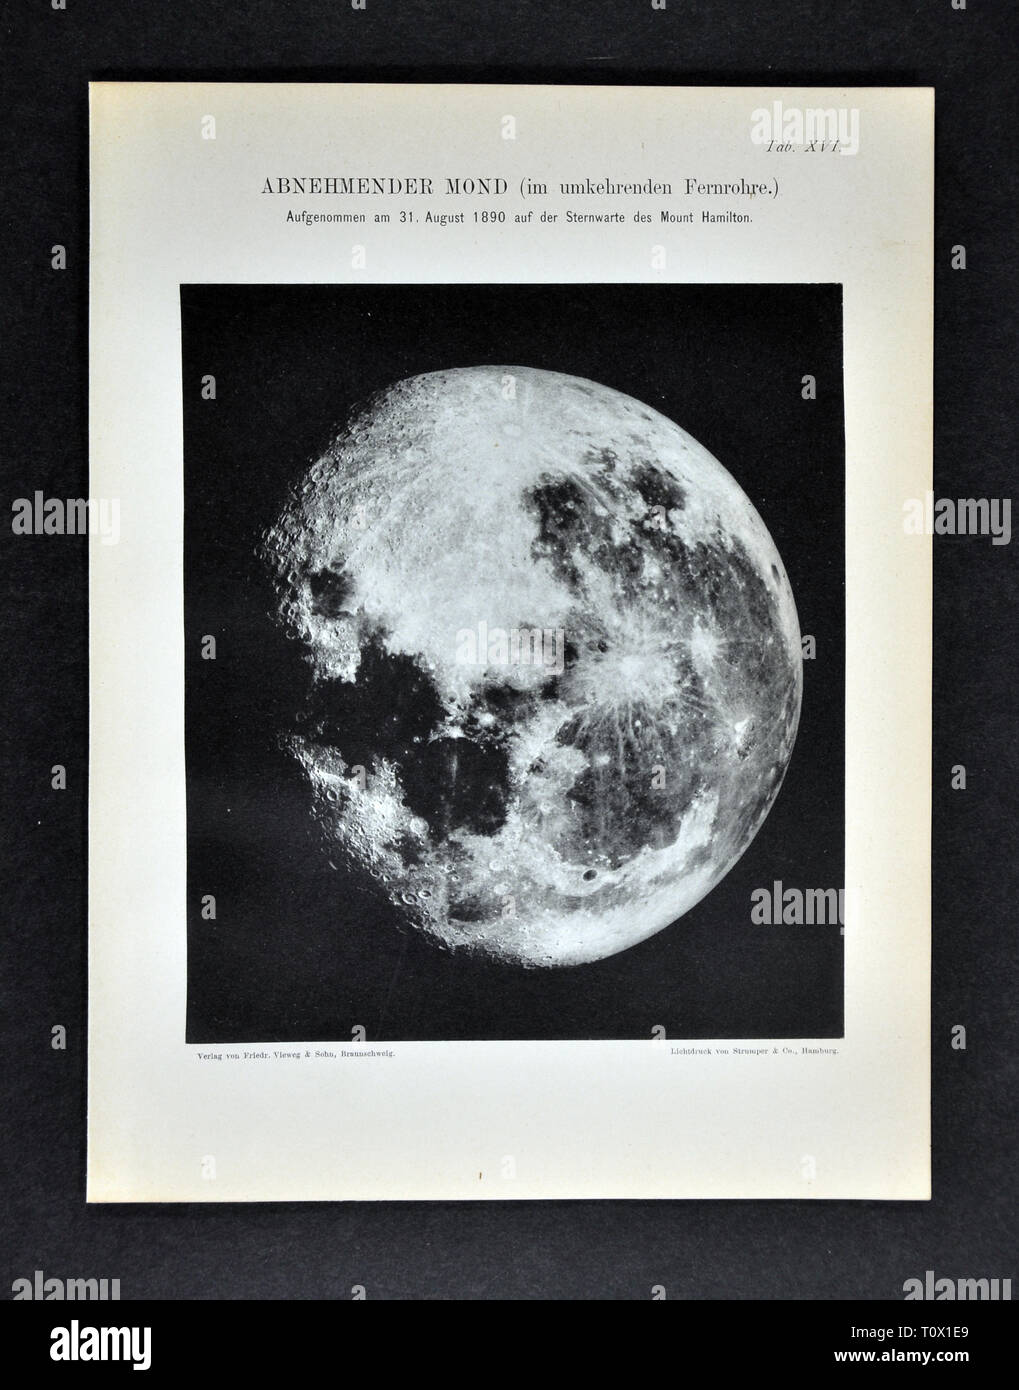 1894 Muller Astronomy Photo of the Moon through a Telescope taken from the Mount Hamilton Observatory on June 29, 1890 Stock Photo